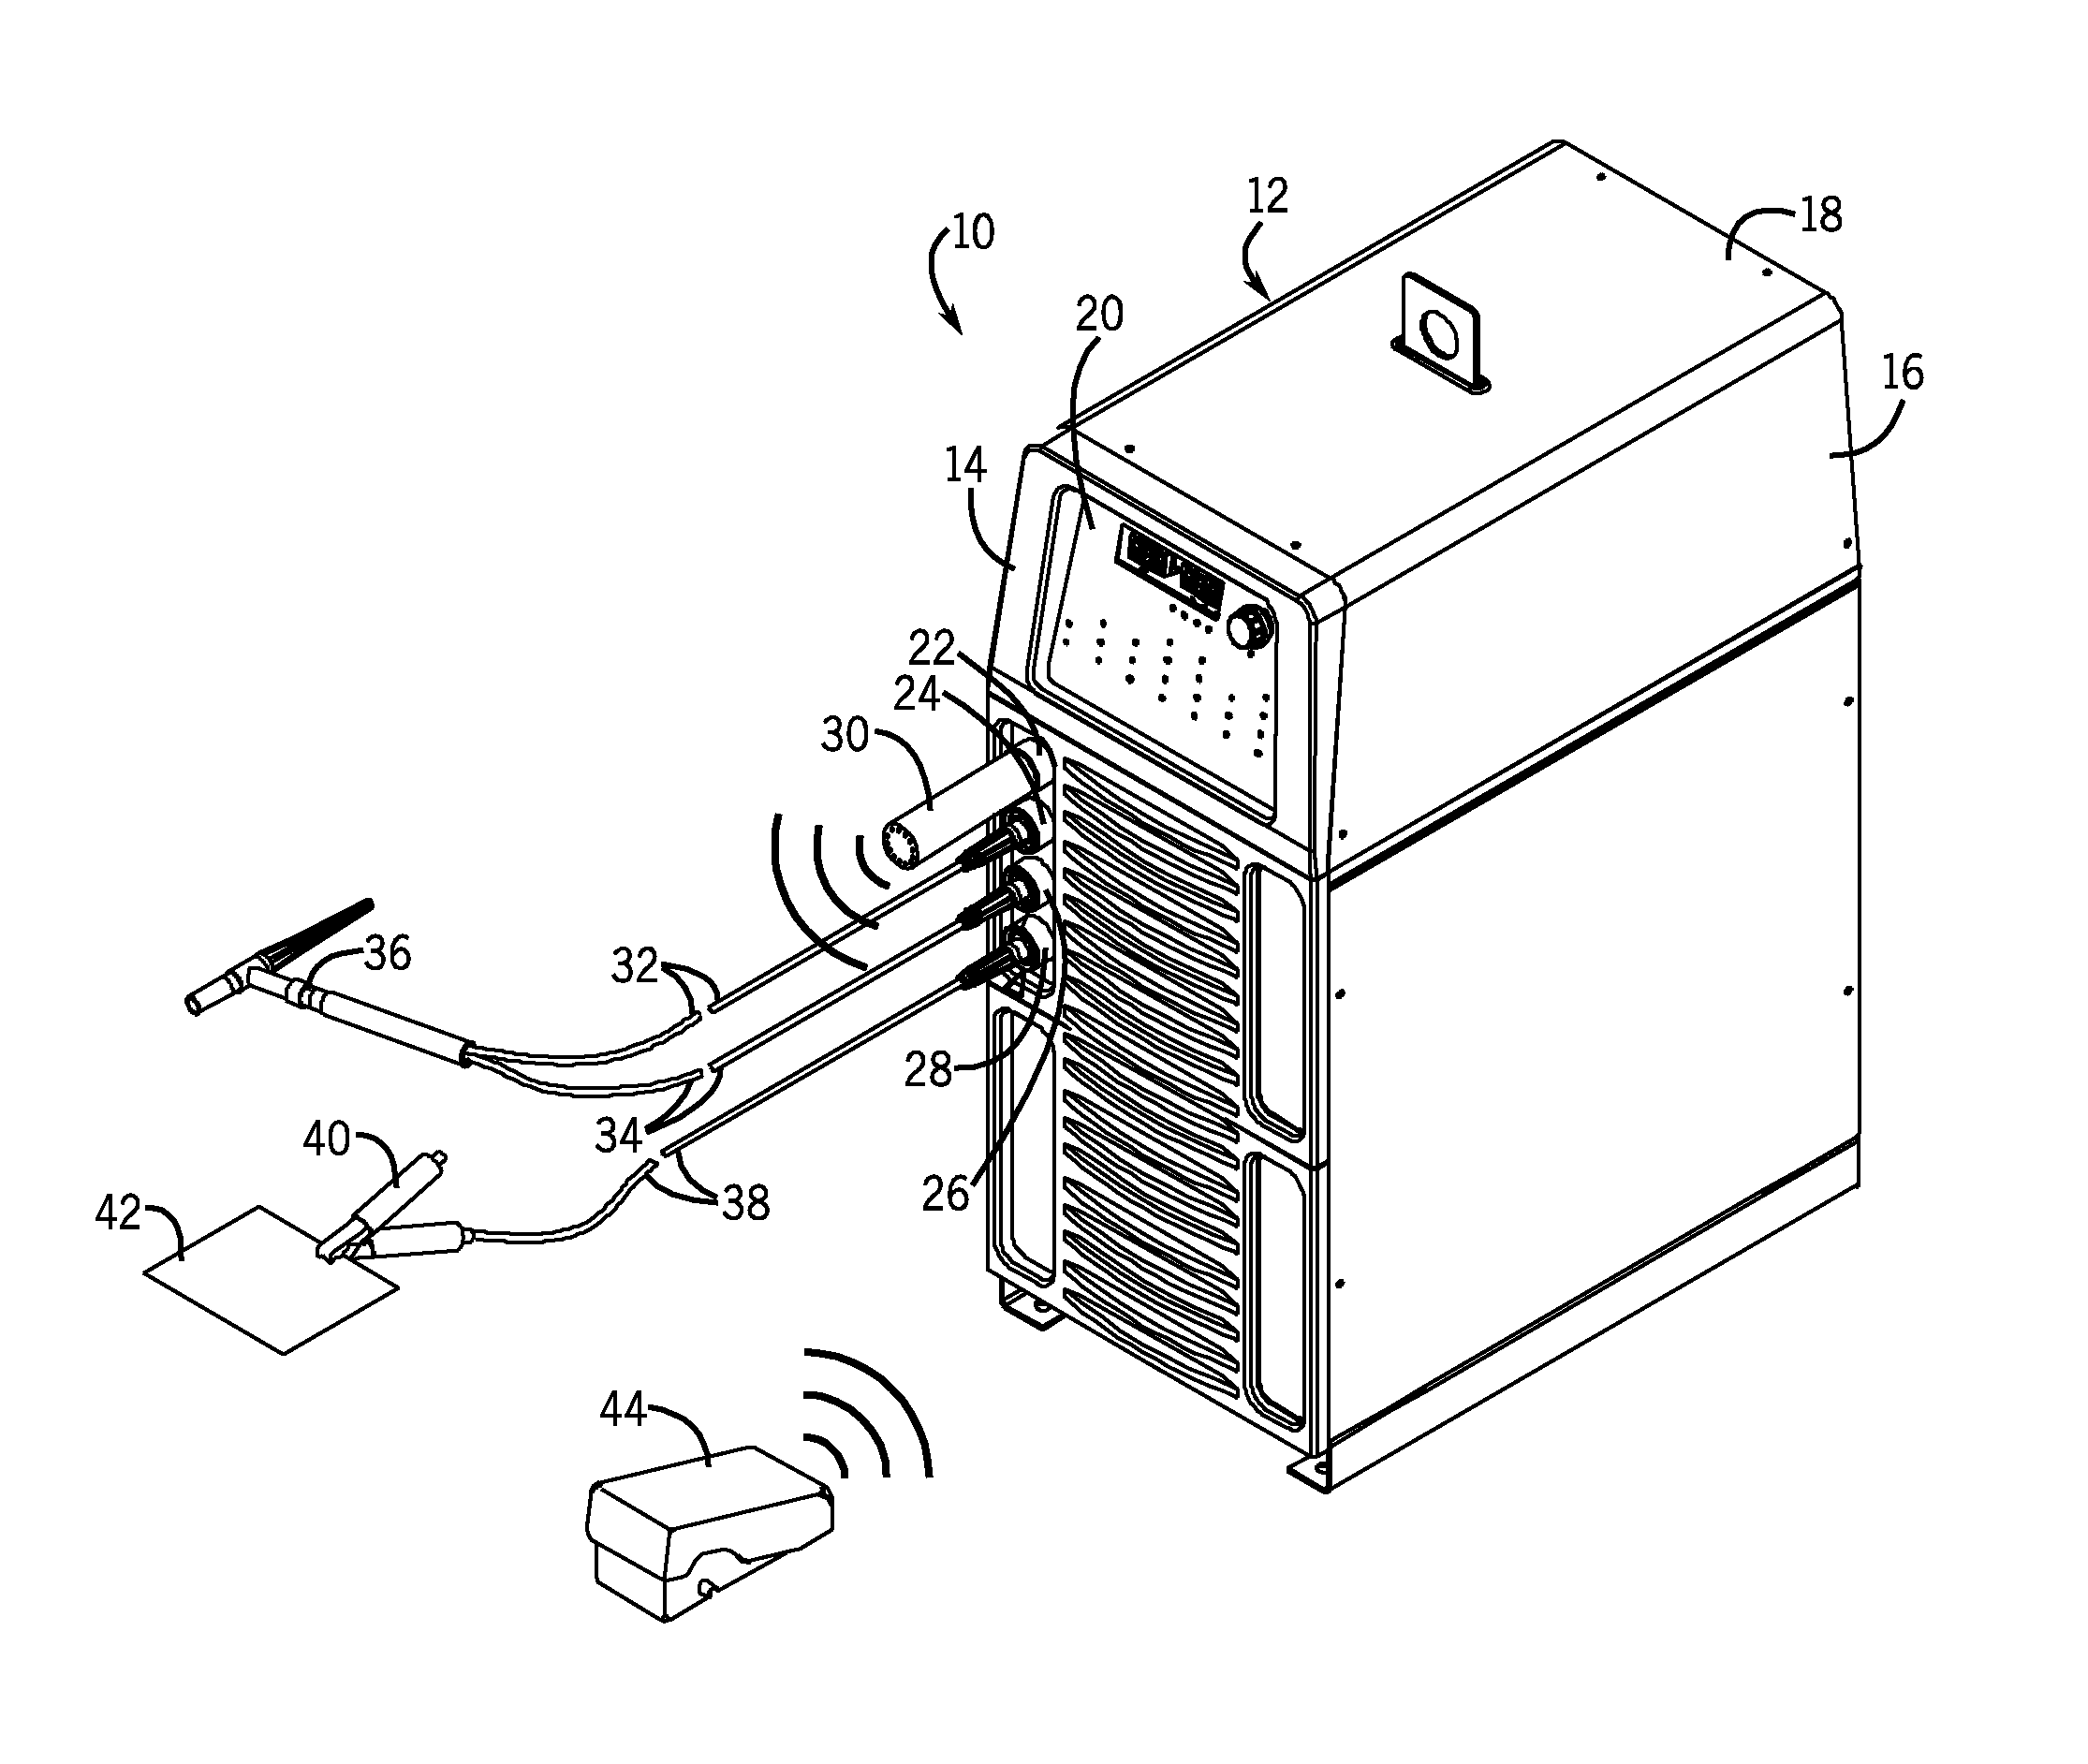 Methods and systems for binding a wireless control device to a welding power source